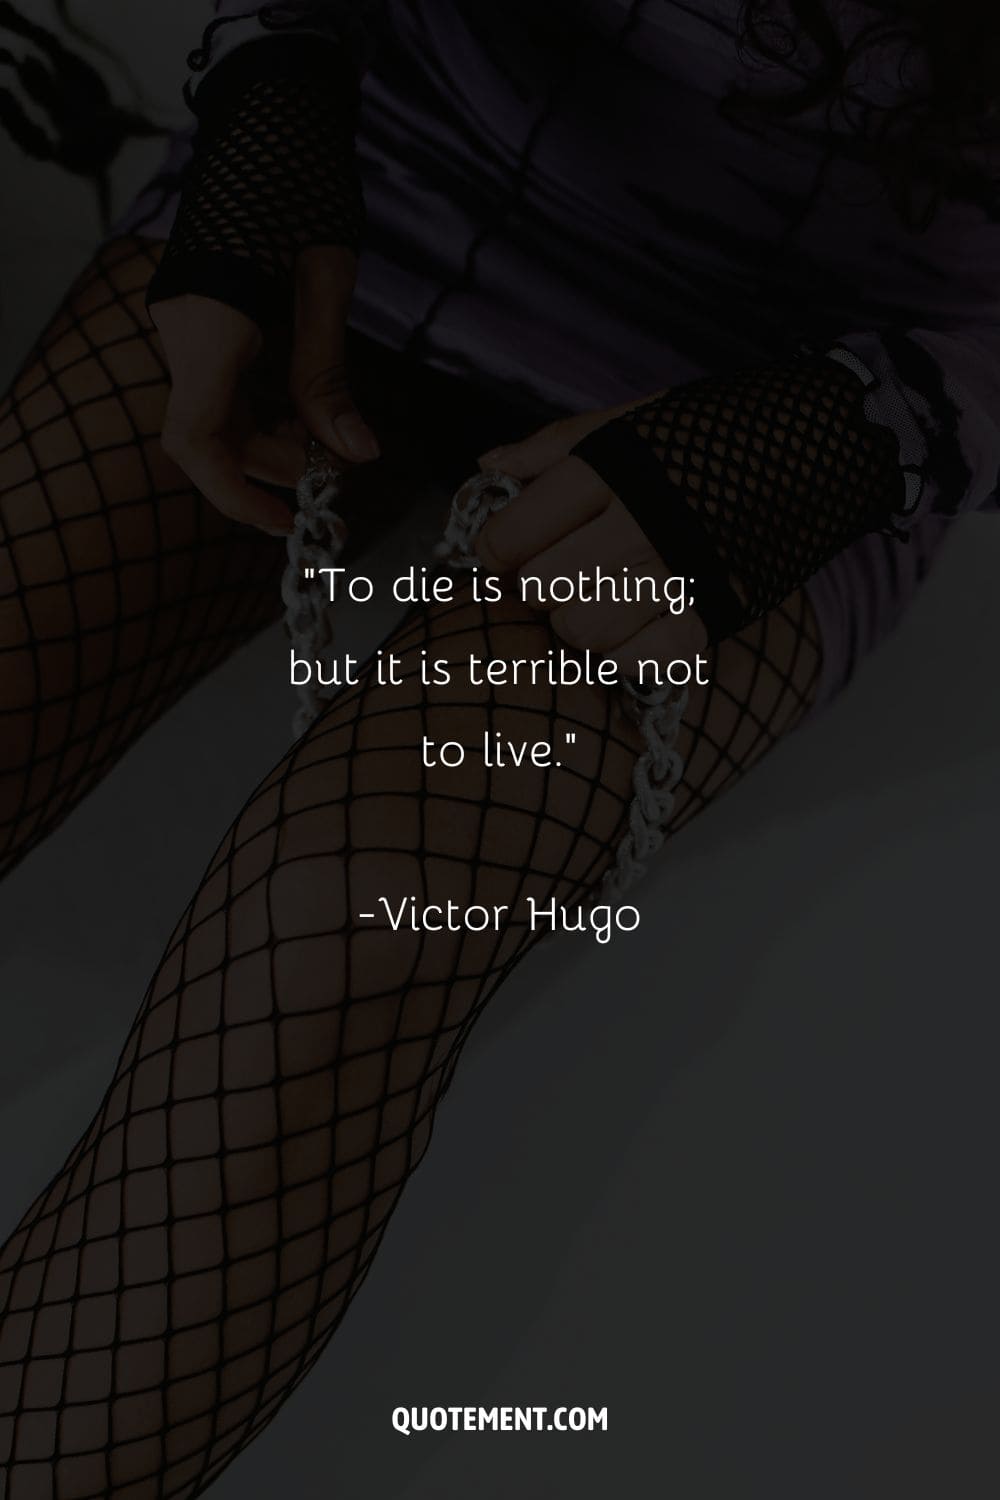 To die is nothing; but it is terrible not to live.